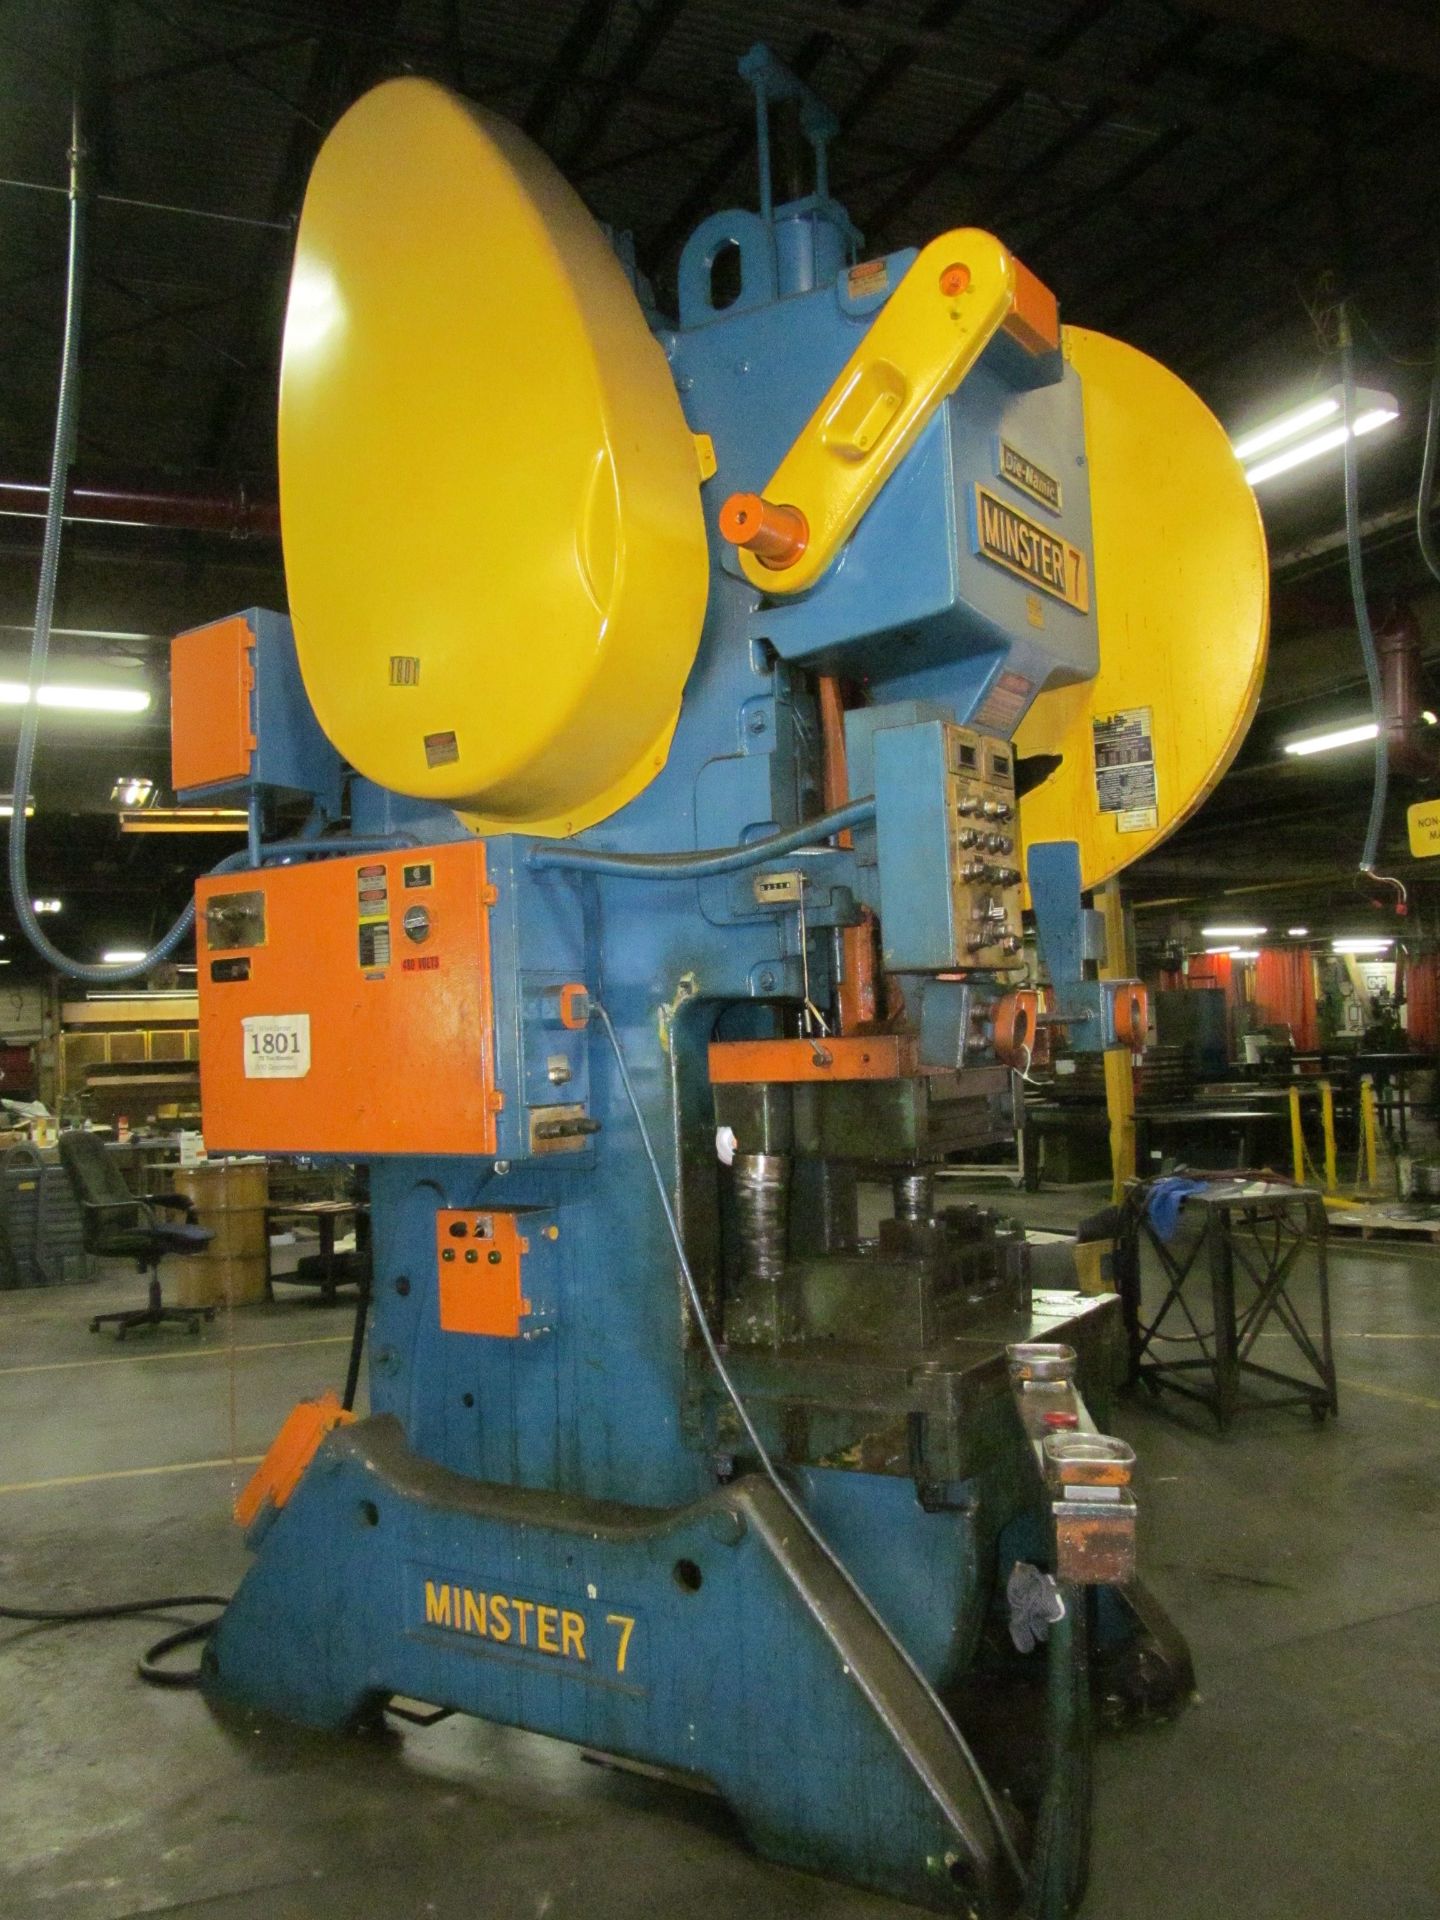 Minster 75-Ton Cap. No. 7 O.B.I. Back-Geared Punch Press, S/N: 7D-SS-25917; with 4 in. Stroke, 21